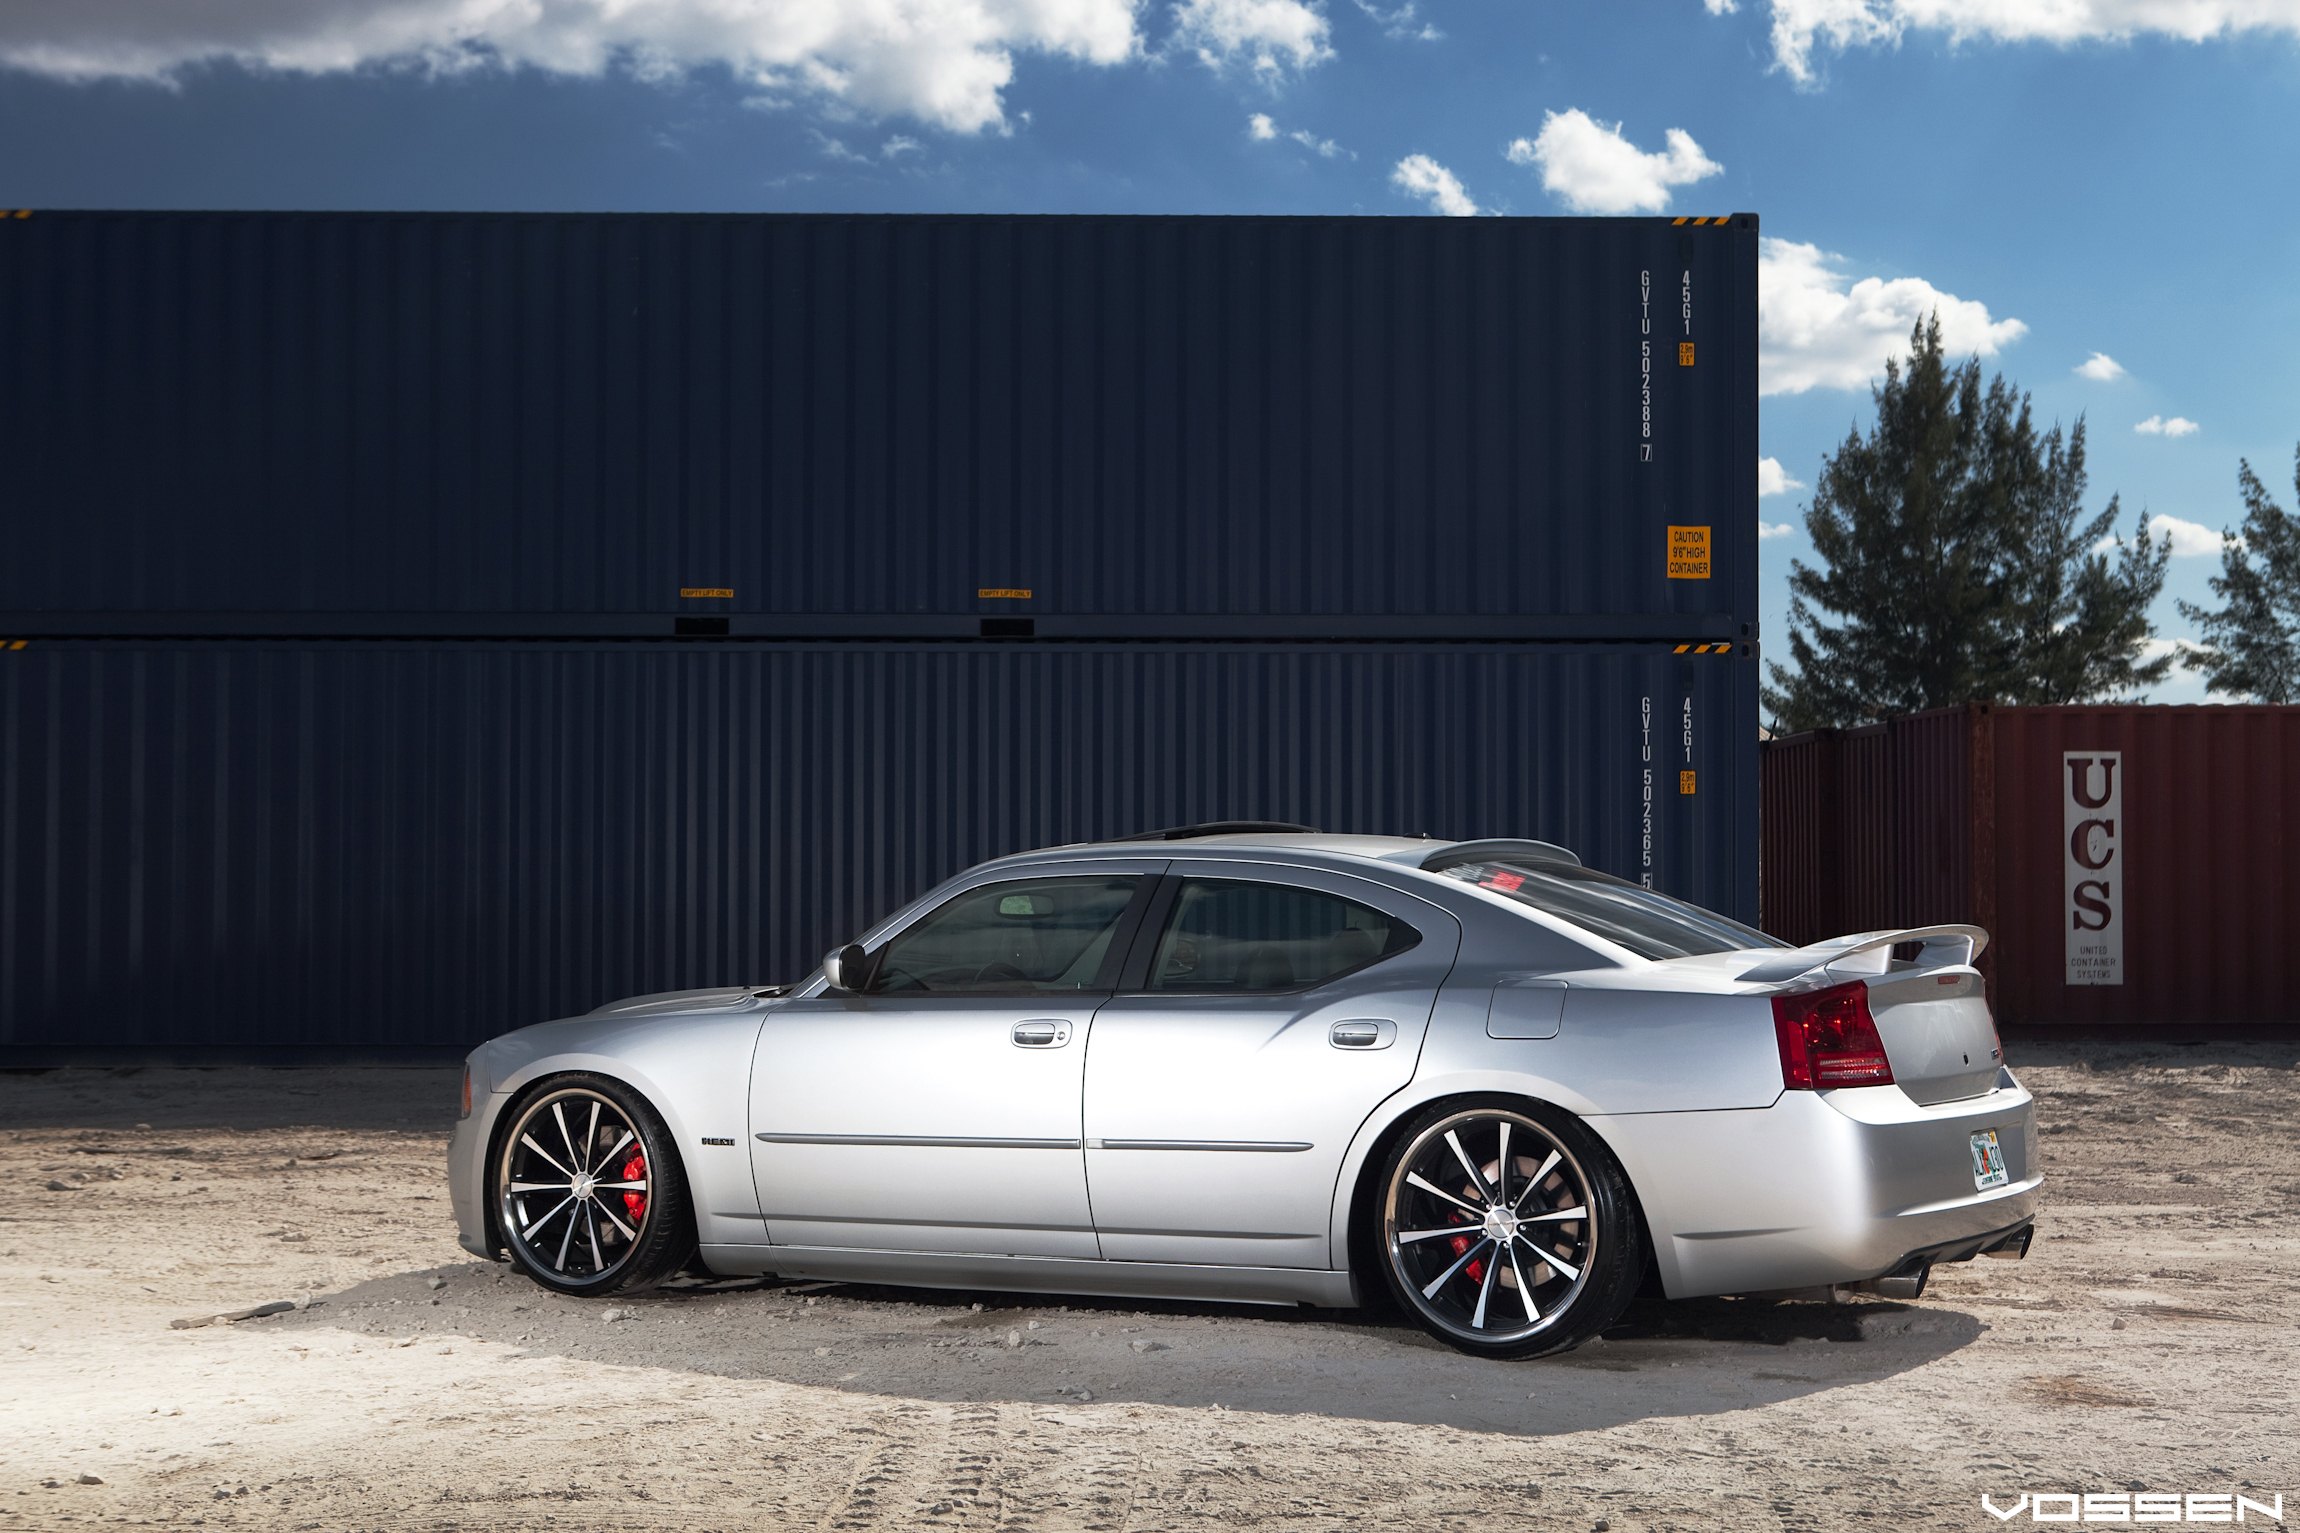 Large Wing Spoiler on Silver Dodge Charger - Photo by Vossen